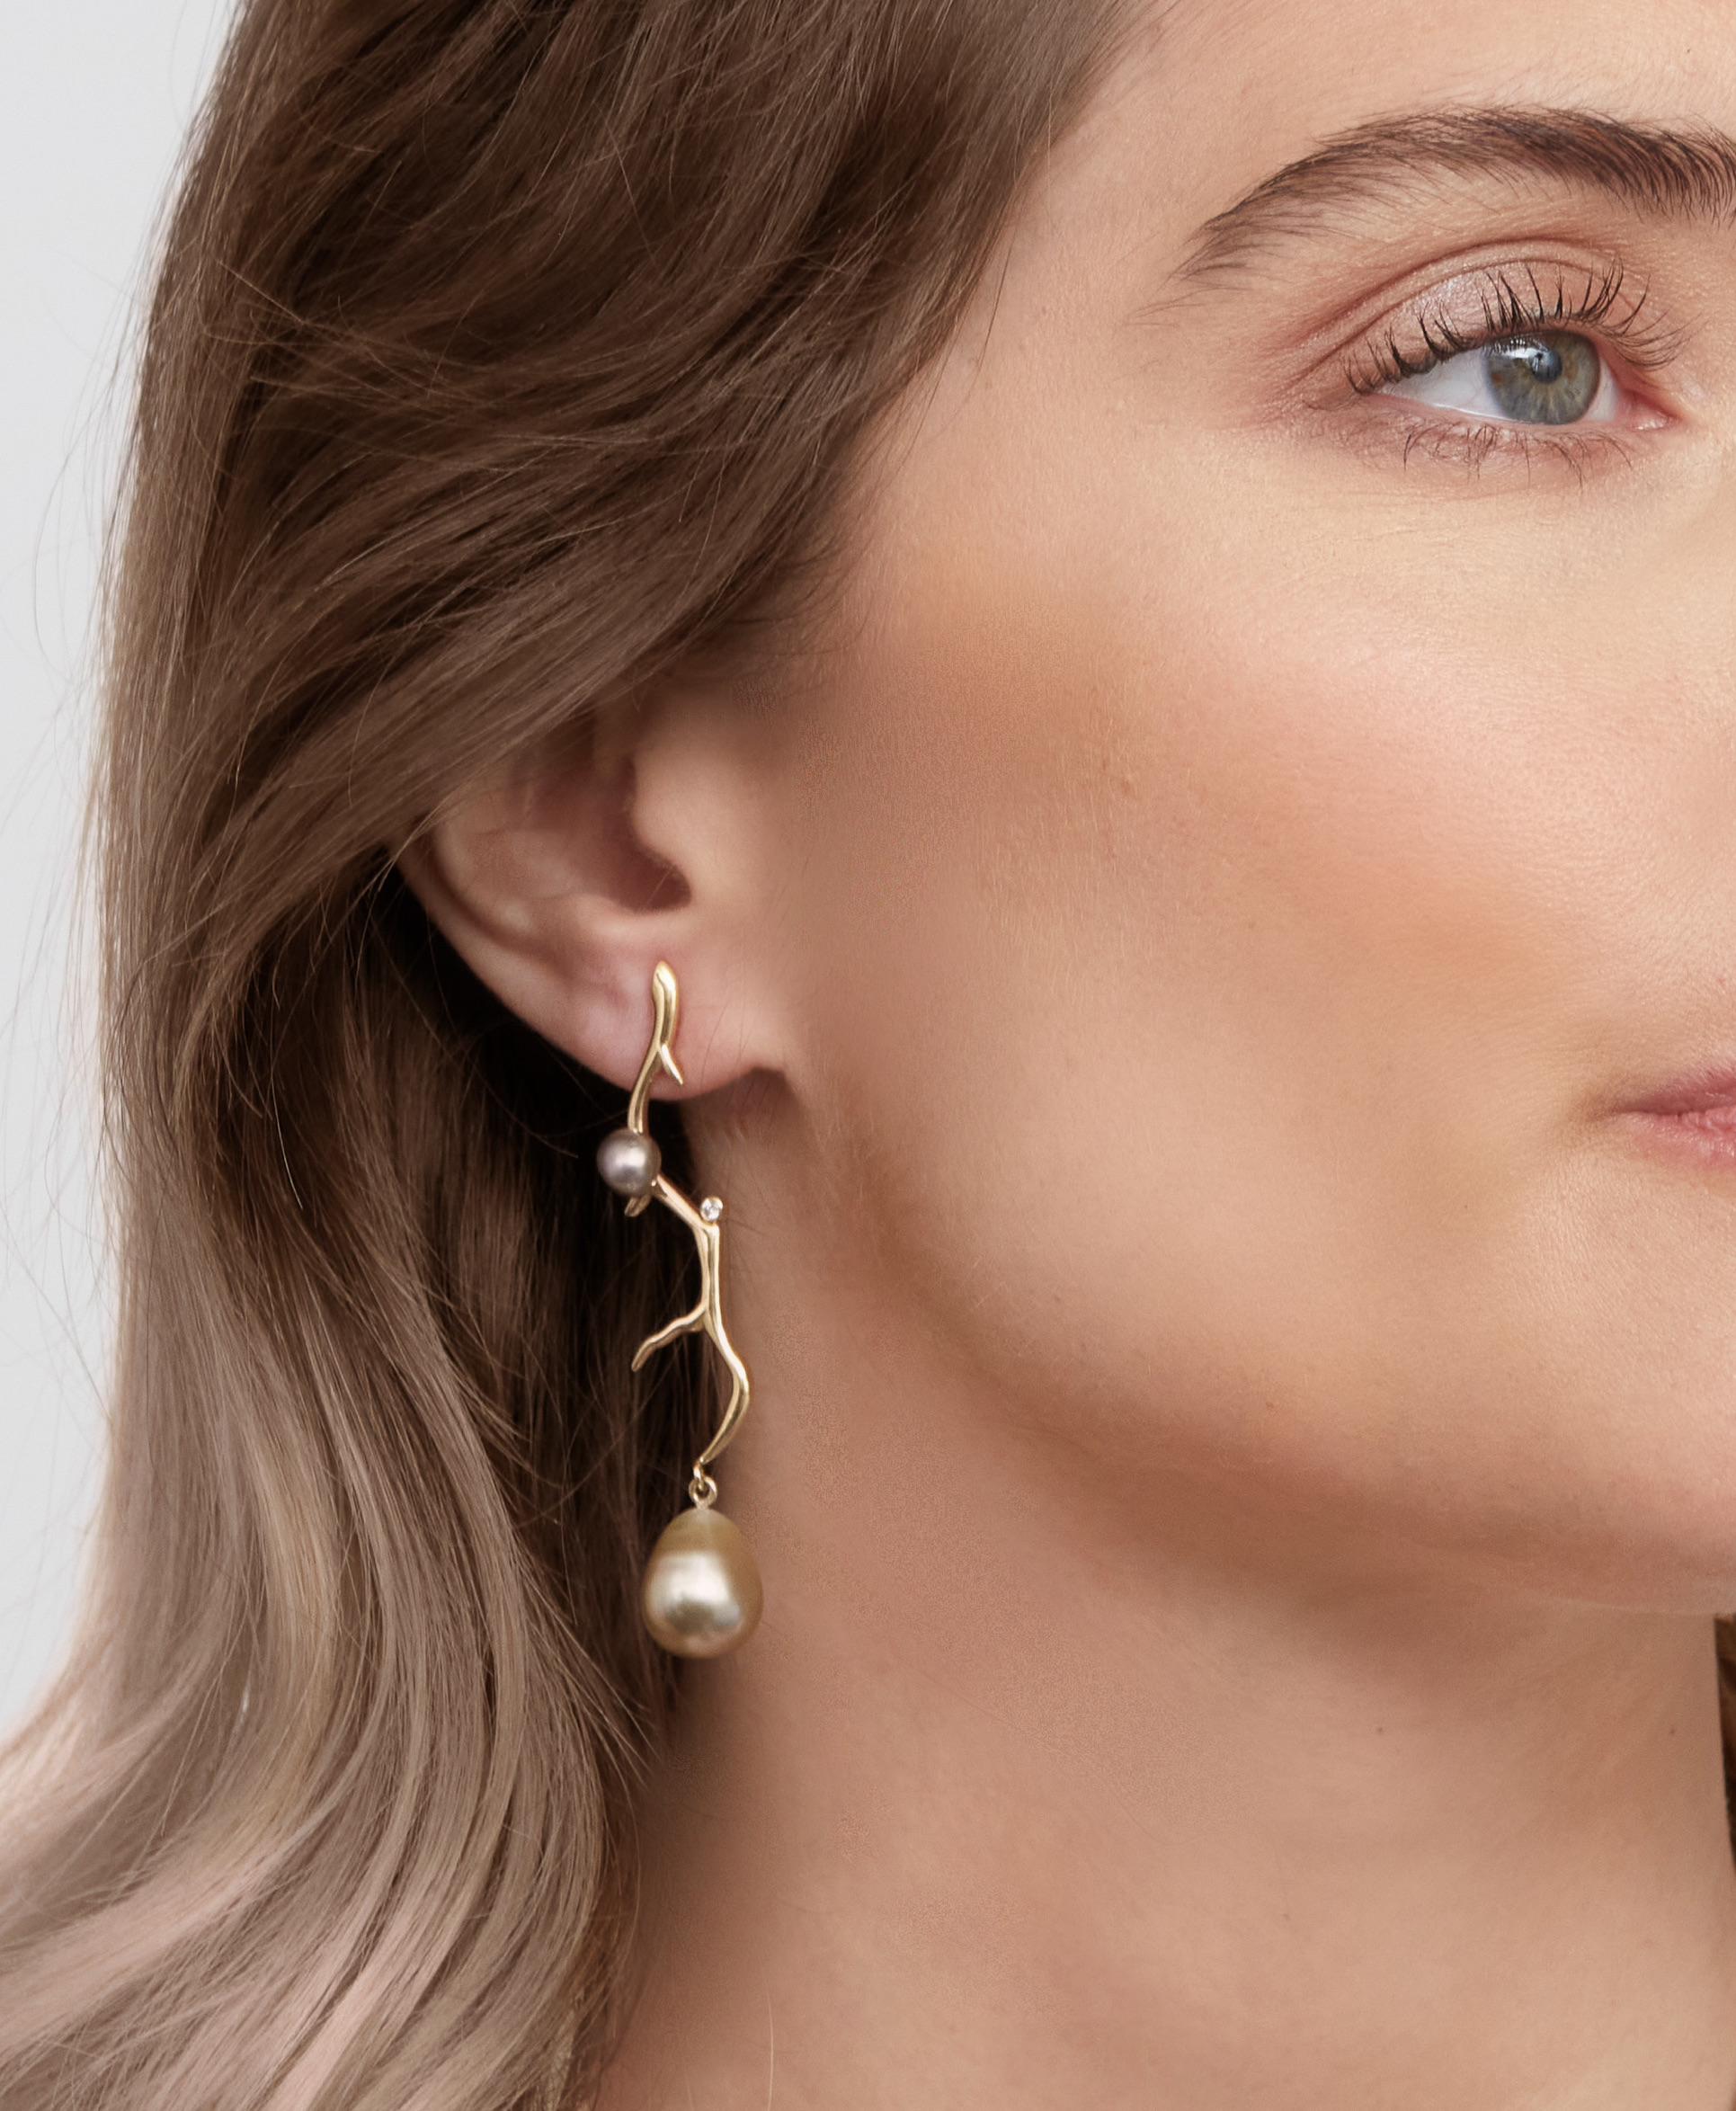 A Lily Hastedt Signature pair of  earrings with Tahitian Black Pearls and Diamonds in 18 Karat yellow Gold.  These earrings are based on coral twigs from Lilly's 'Coral Inspirations' collection and 'reflect' each other in an asymmetric way.  The